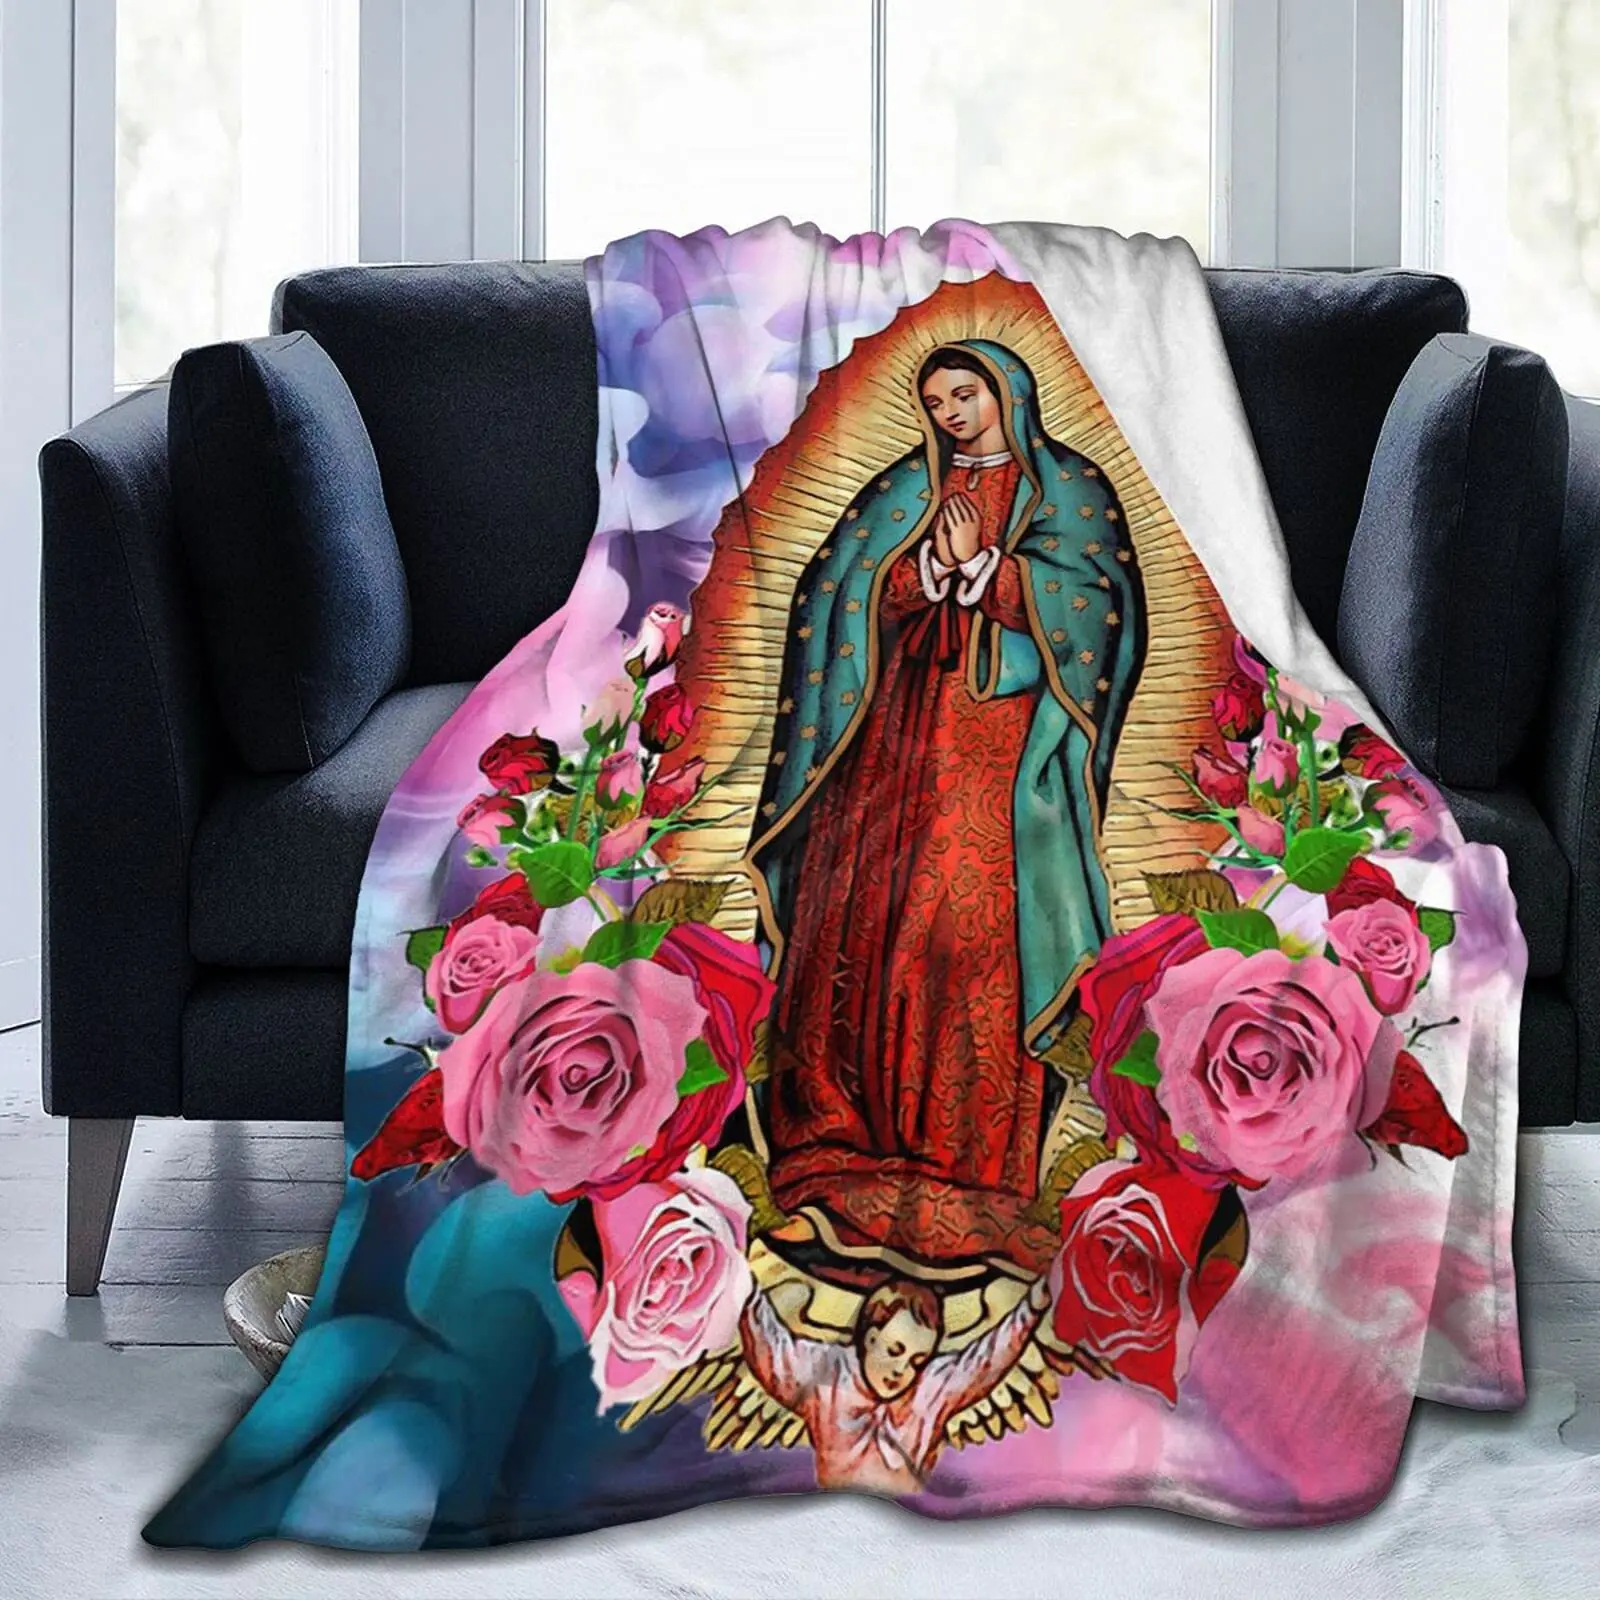 

Our Lady Of Guadalupe Mexican Virgin Mary Blanket Christian Catholic Flannel Vintage Throw Blanket for Chair Covering Sofa Queen